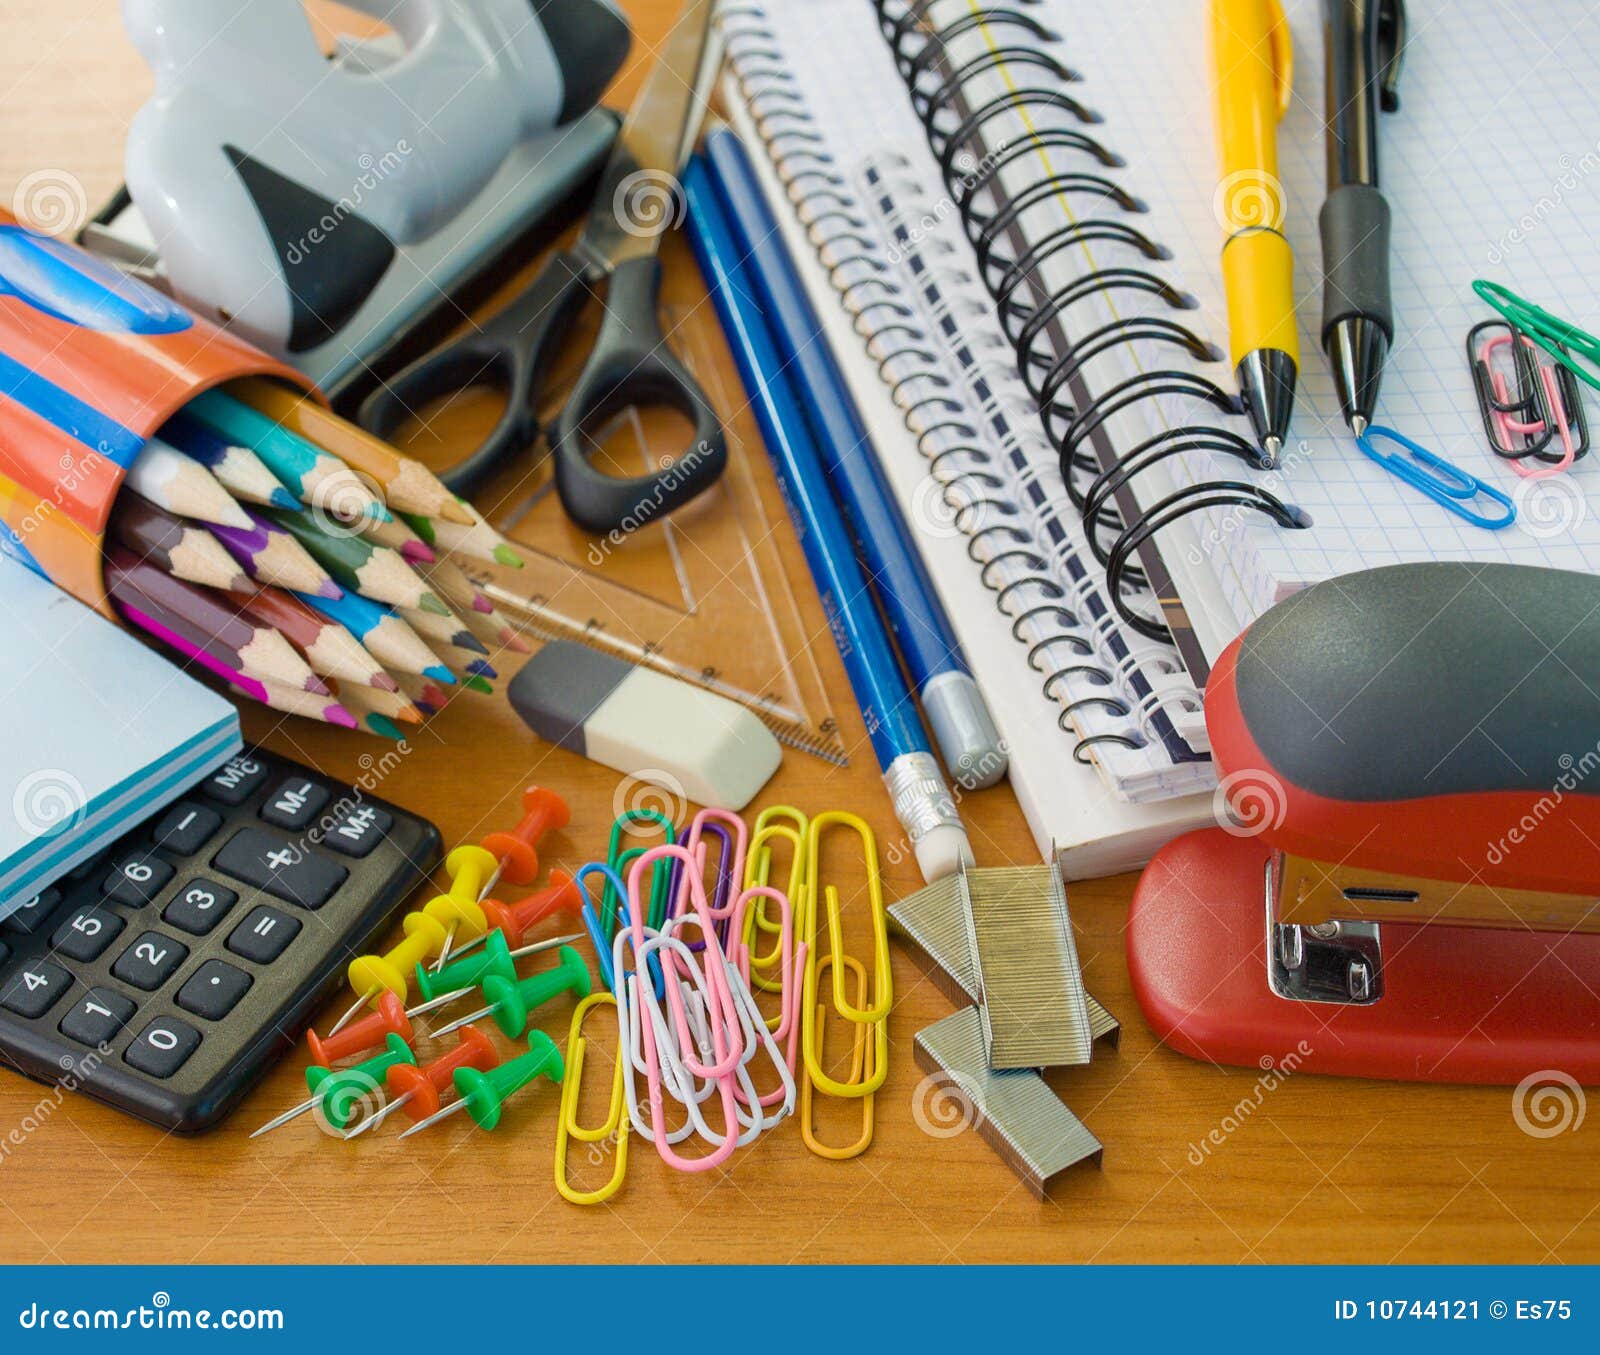 School office supplies stock image. Image of colored - 10744121